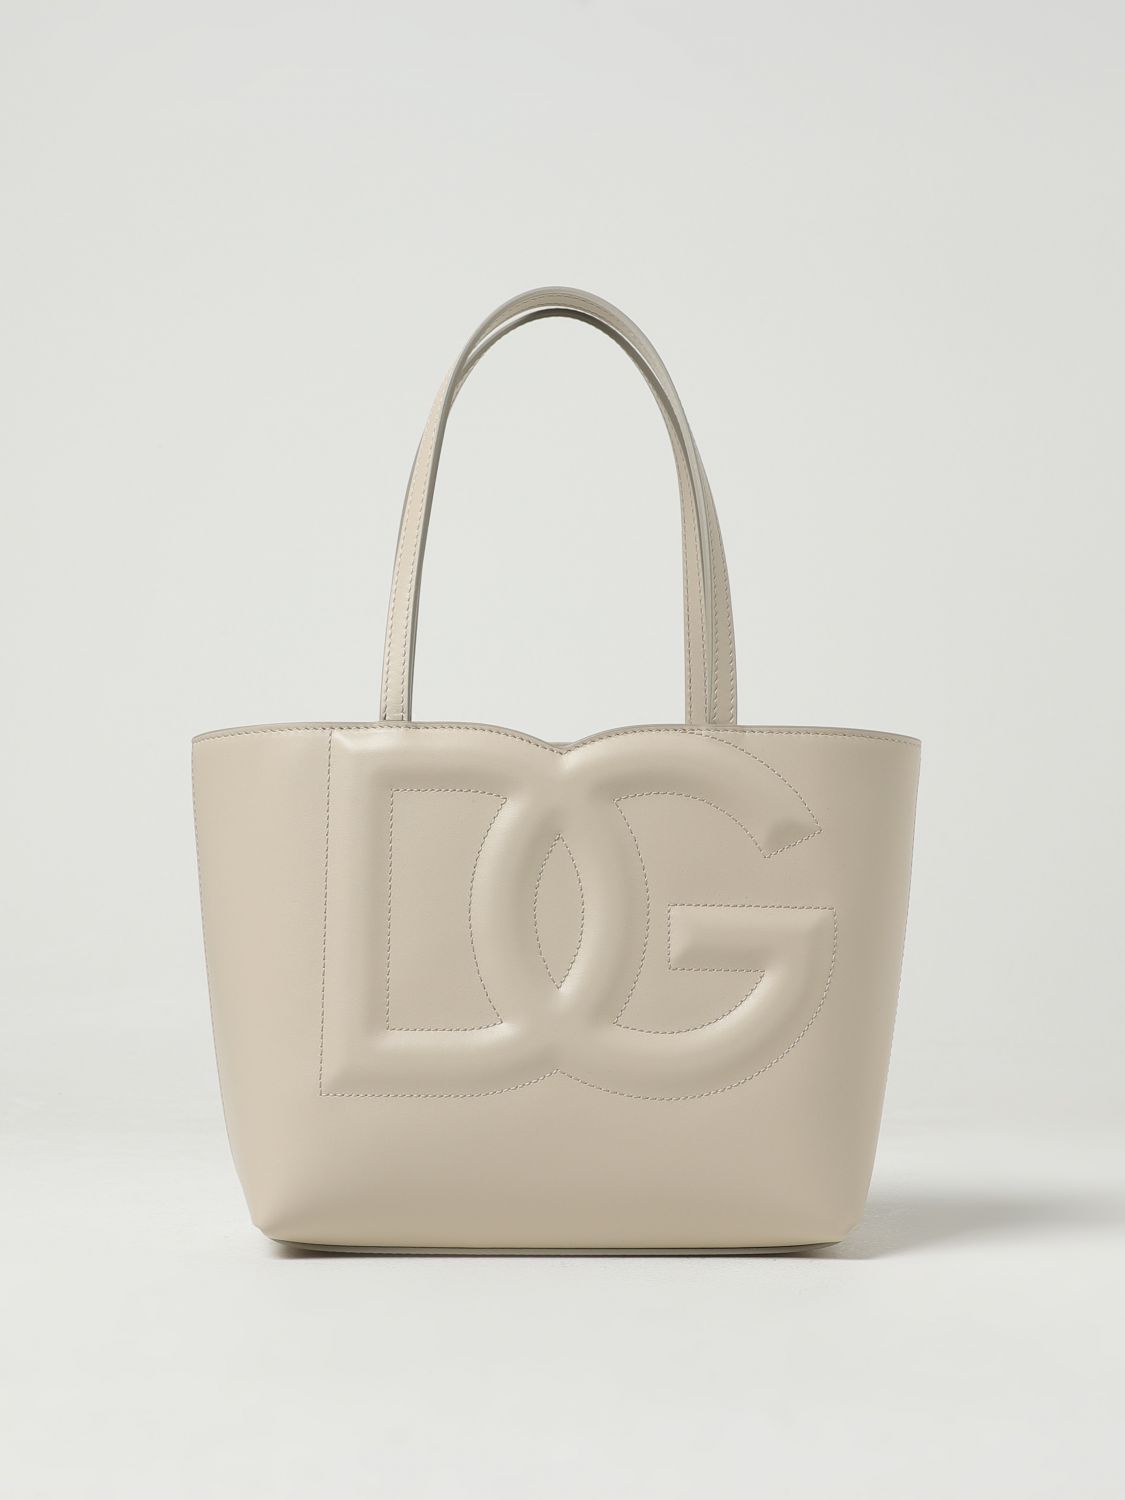 Dolce & Gabbana Bag In Leather With Monogram In White